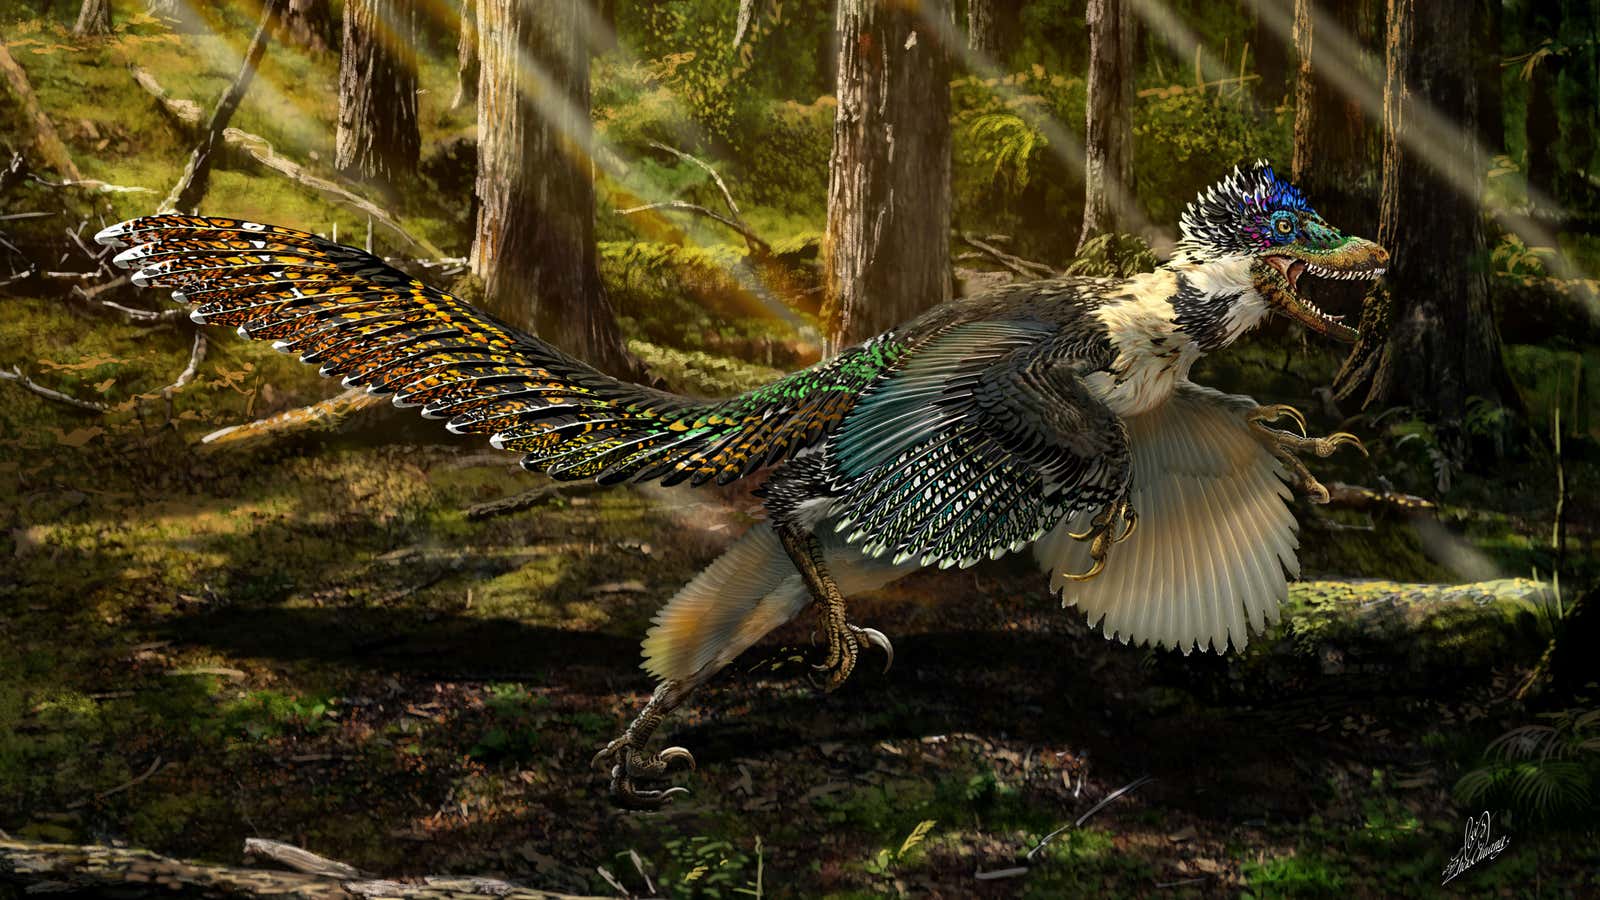 The feathery cousin of the beloved velociraptor